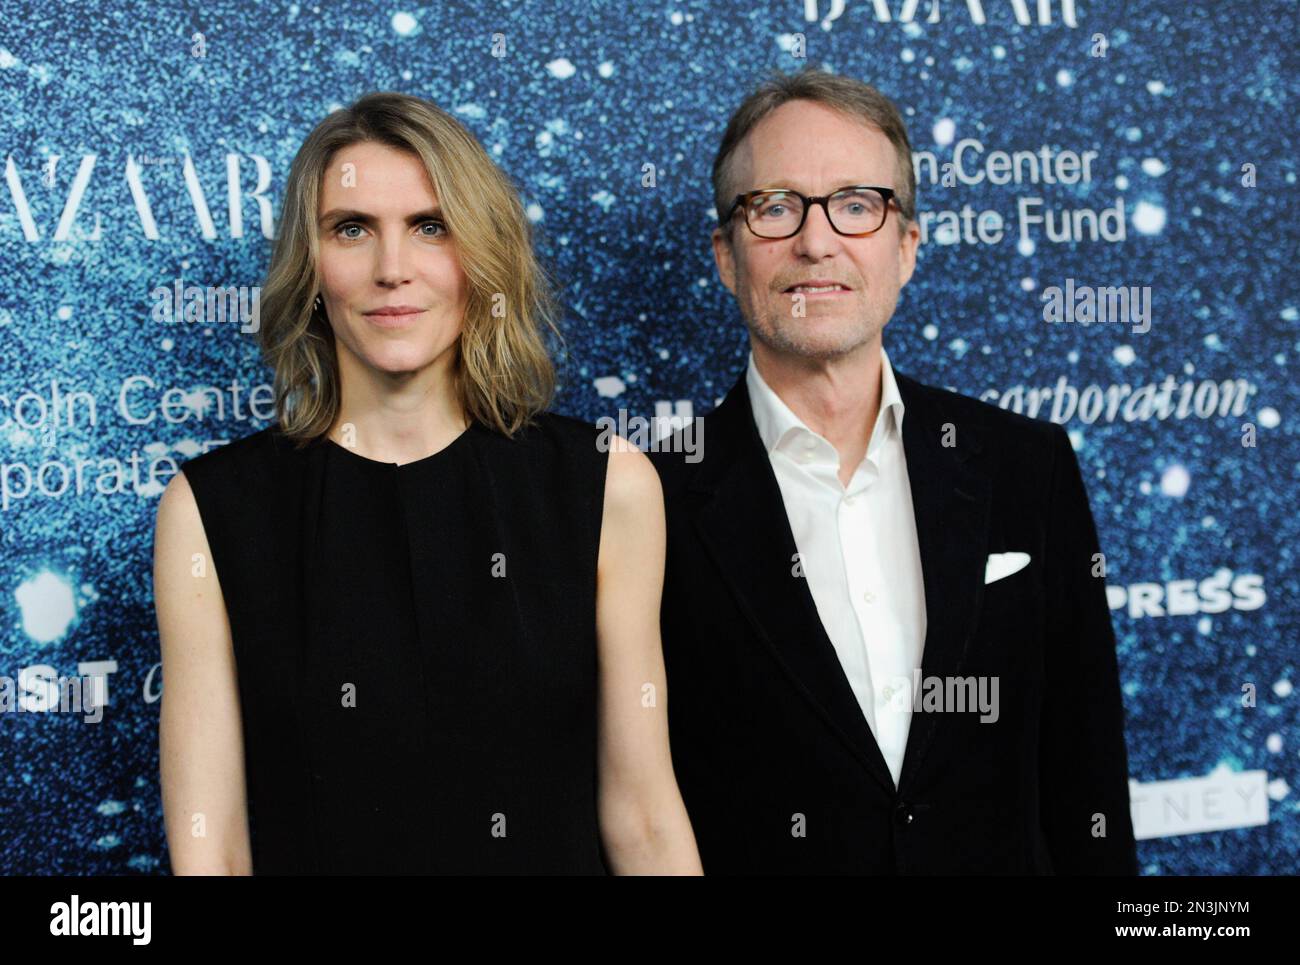 Austin Hearst and wife Gabriela Perezutti Hearst attend the 2nd Annual Save  the Children Illumination Gala at The Plaza Hotel on Wednesday, Nov. 19,  2014, in New York. (Photo by Evan Agostini/Invision/AP